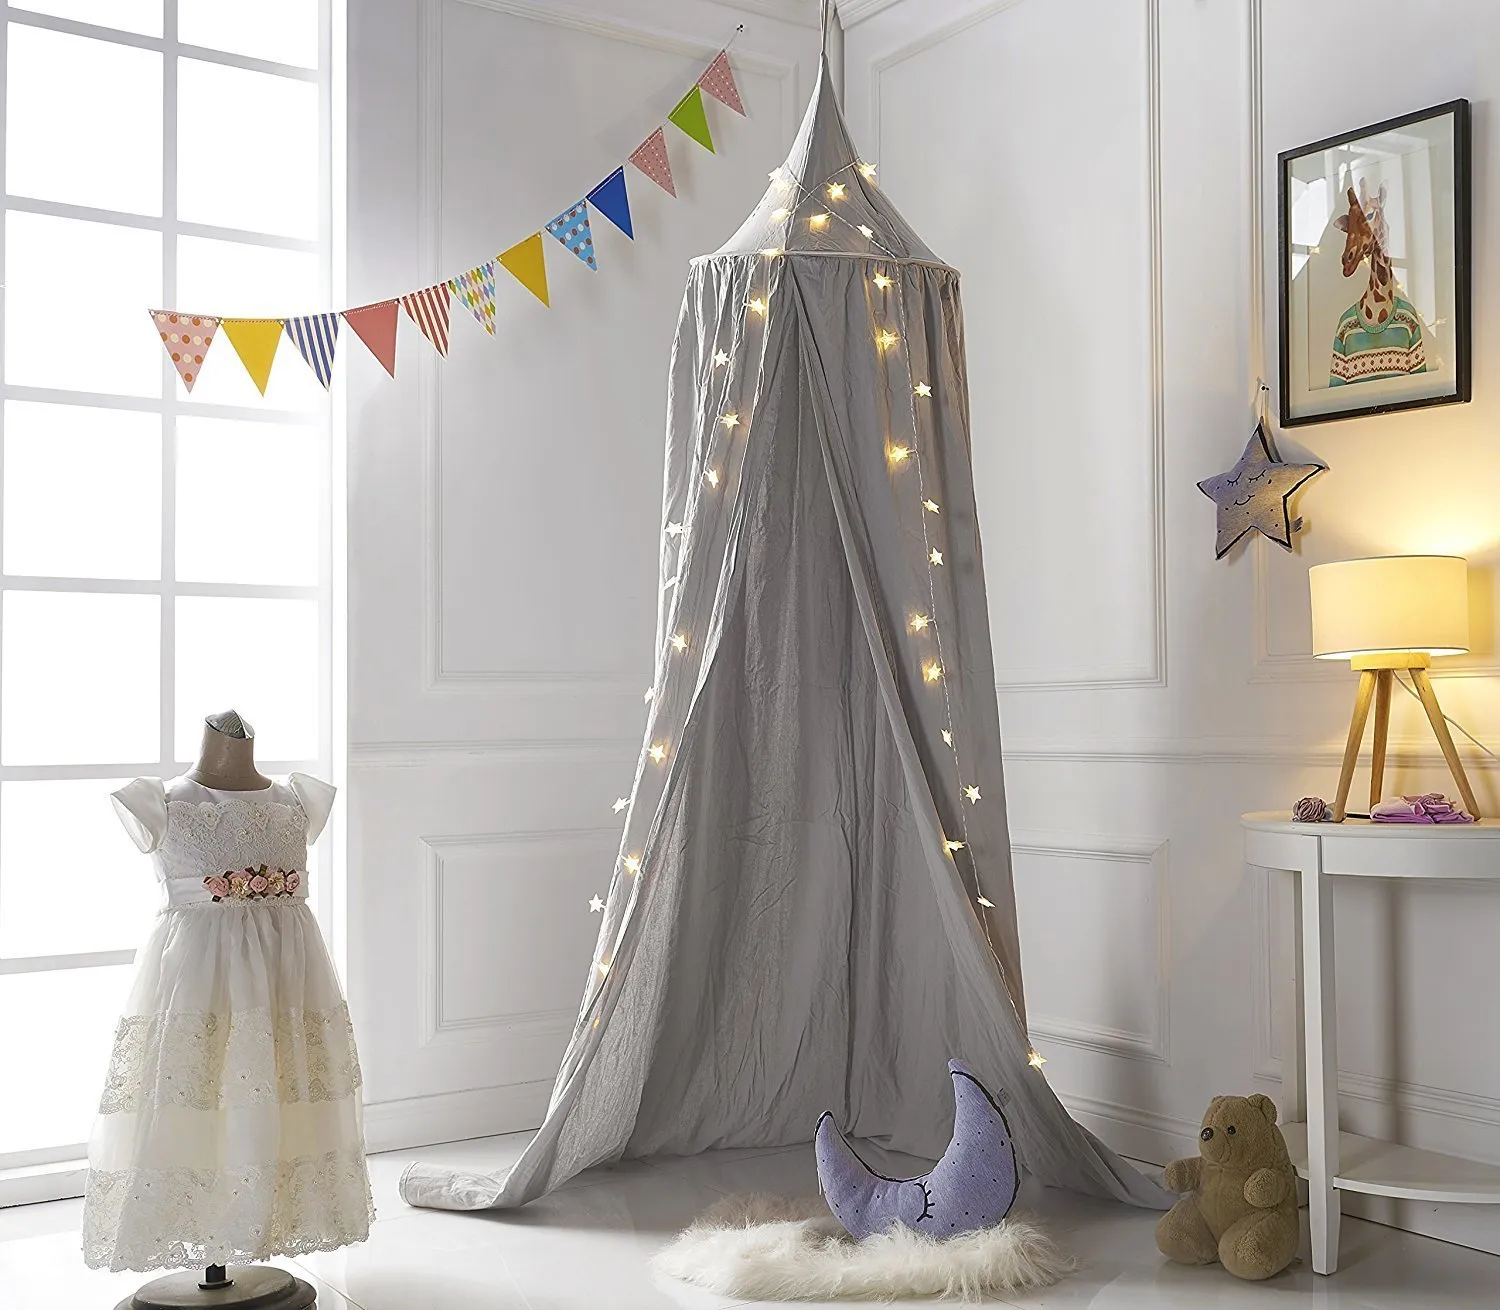 Princess Bed Canopy Mosquito Kids Girls Room Decor Baby Bed Net Girl Room Decoration Play Tent Round Dome Cotton Canopy D20 210316